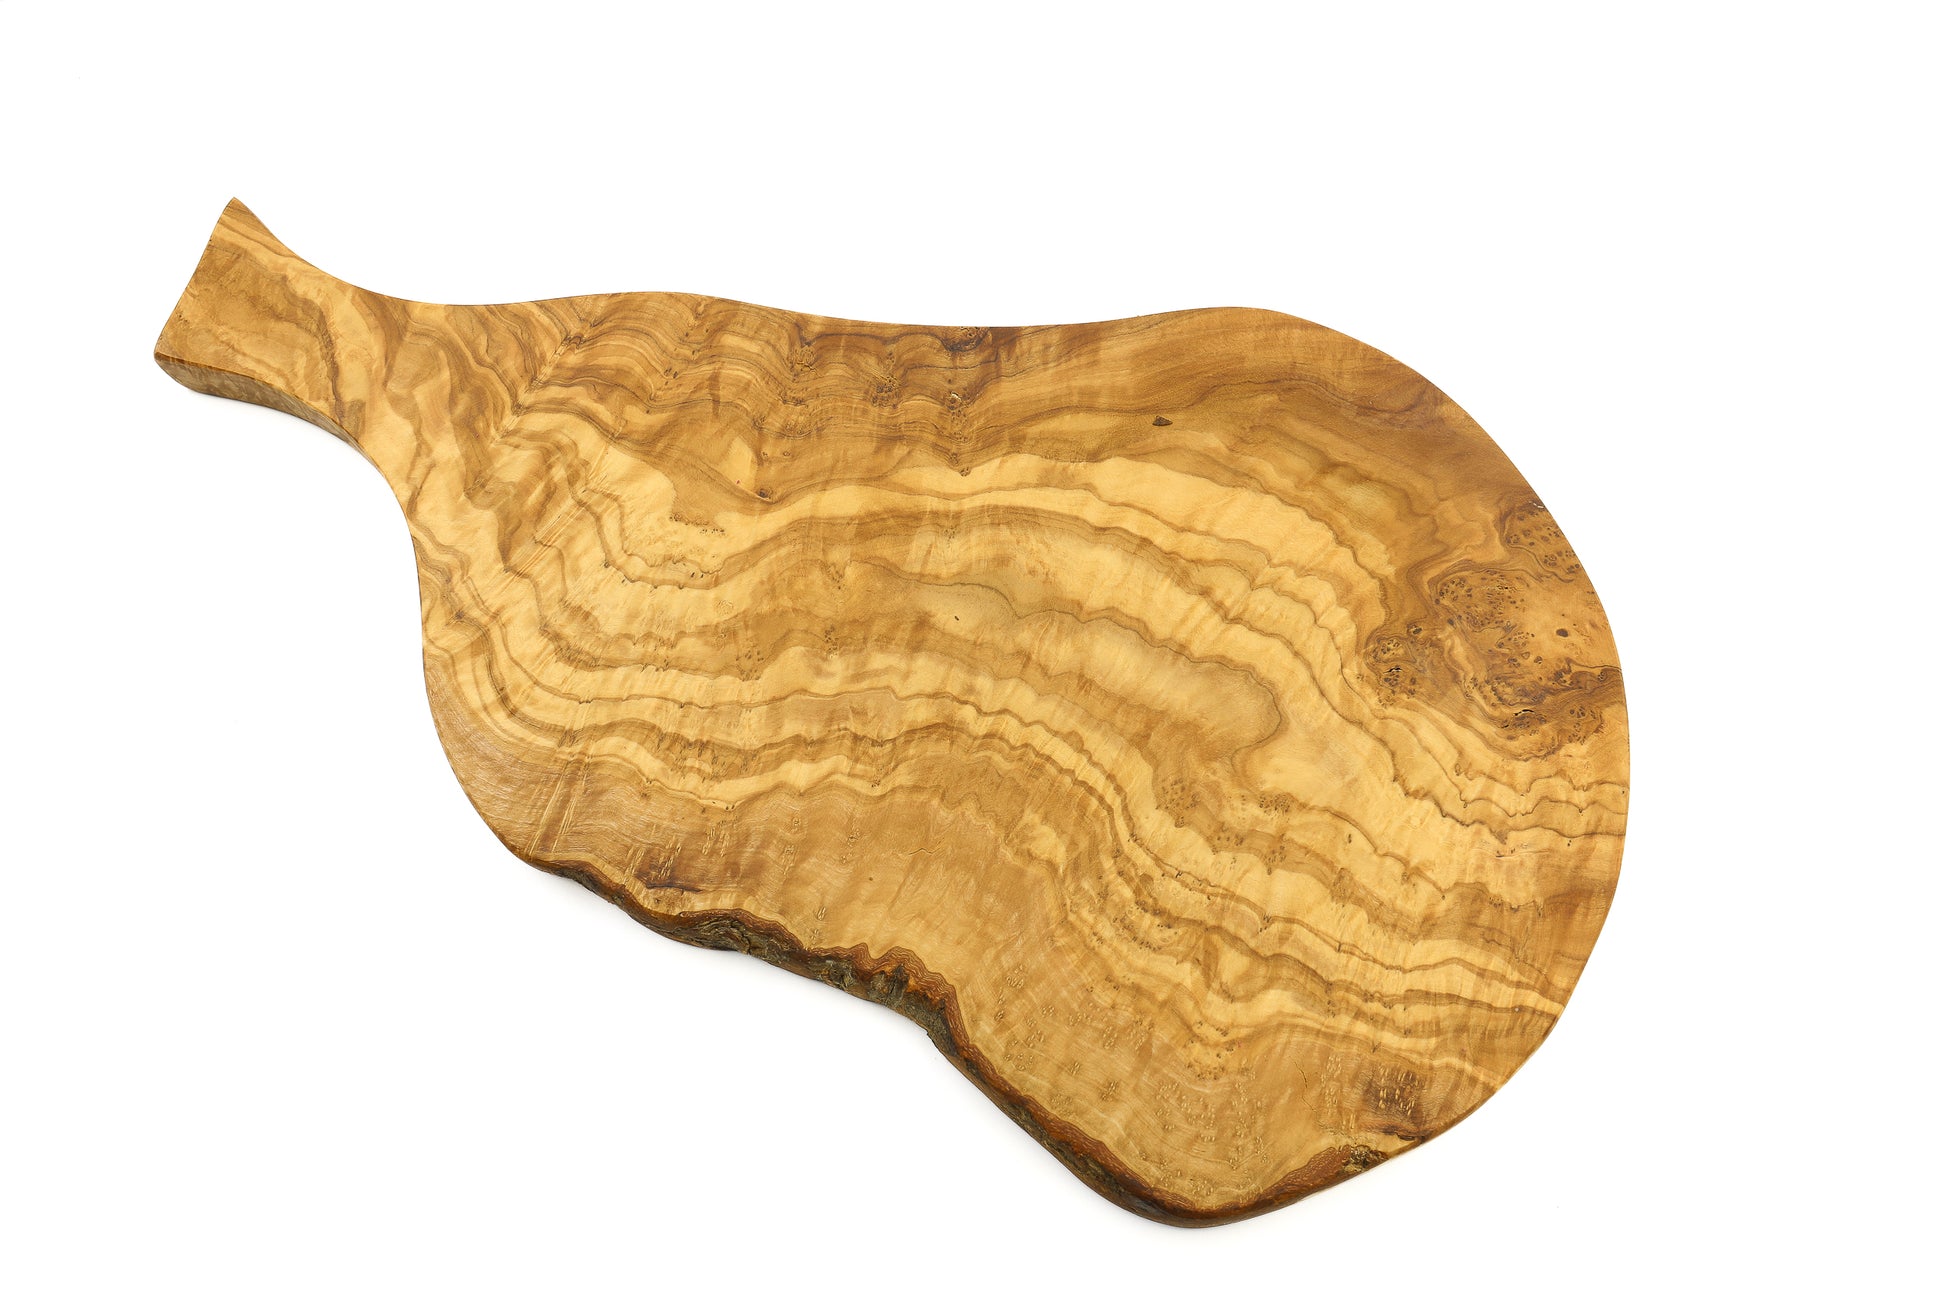 Unique olive wood cutting board with a beef thigh shape and an in-hand handle for a special cutting experience